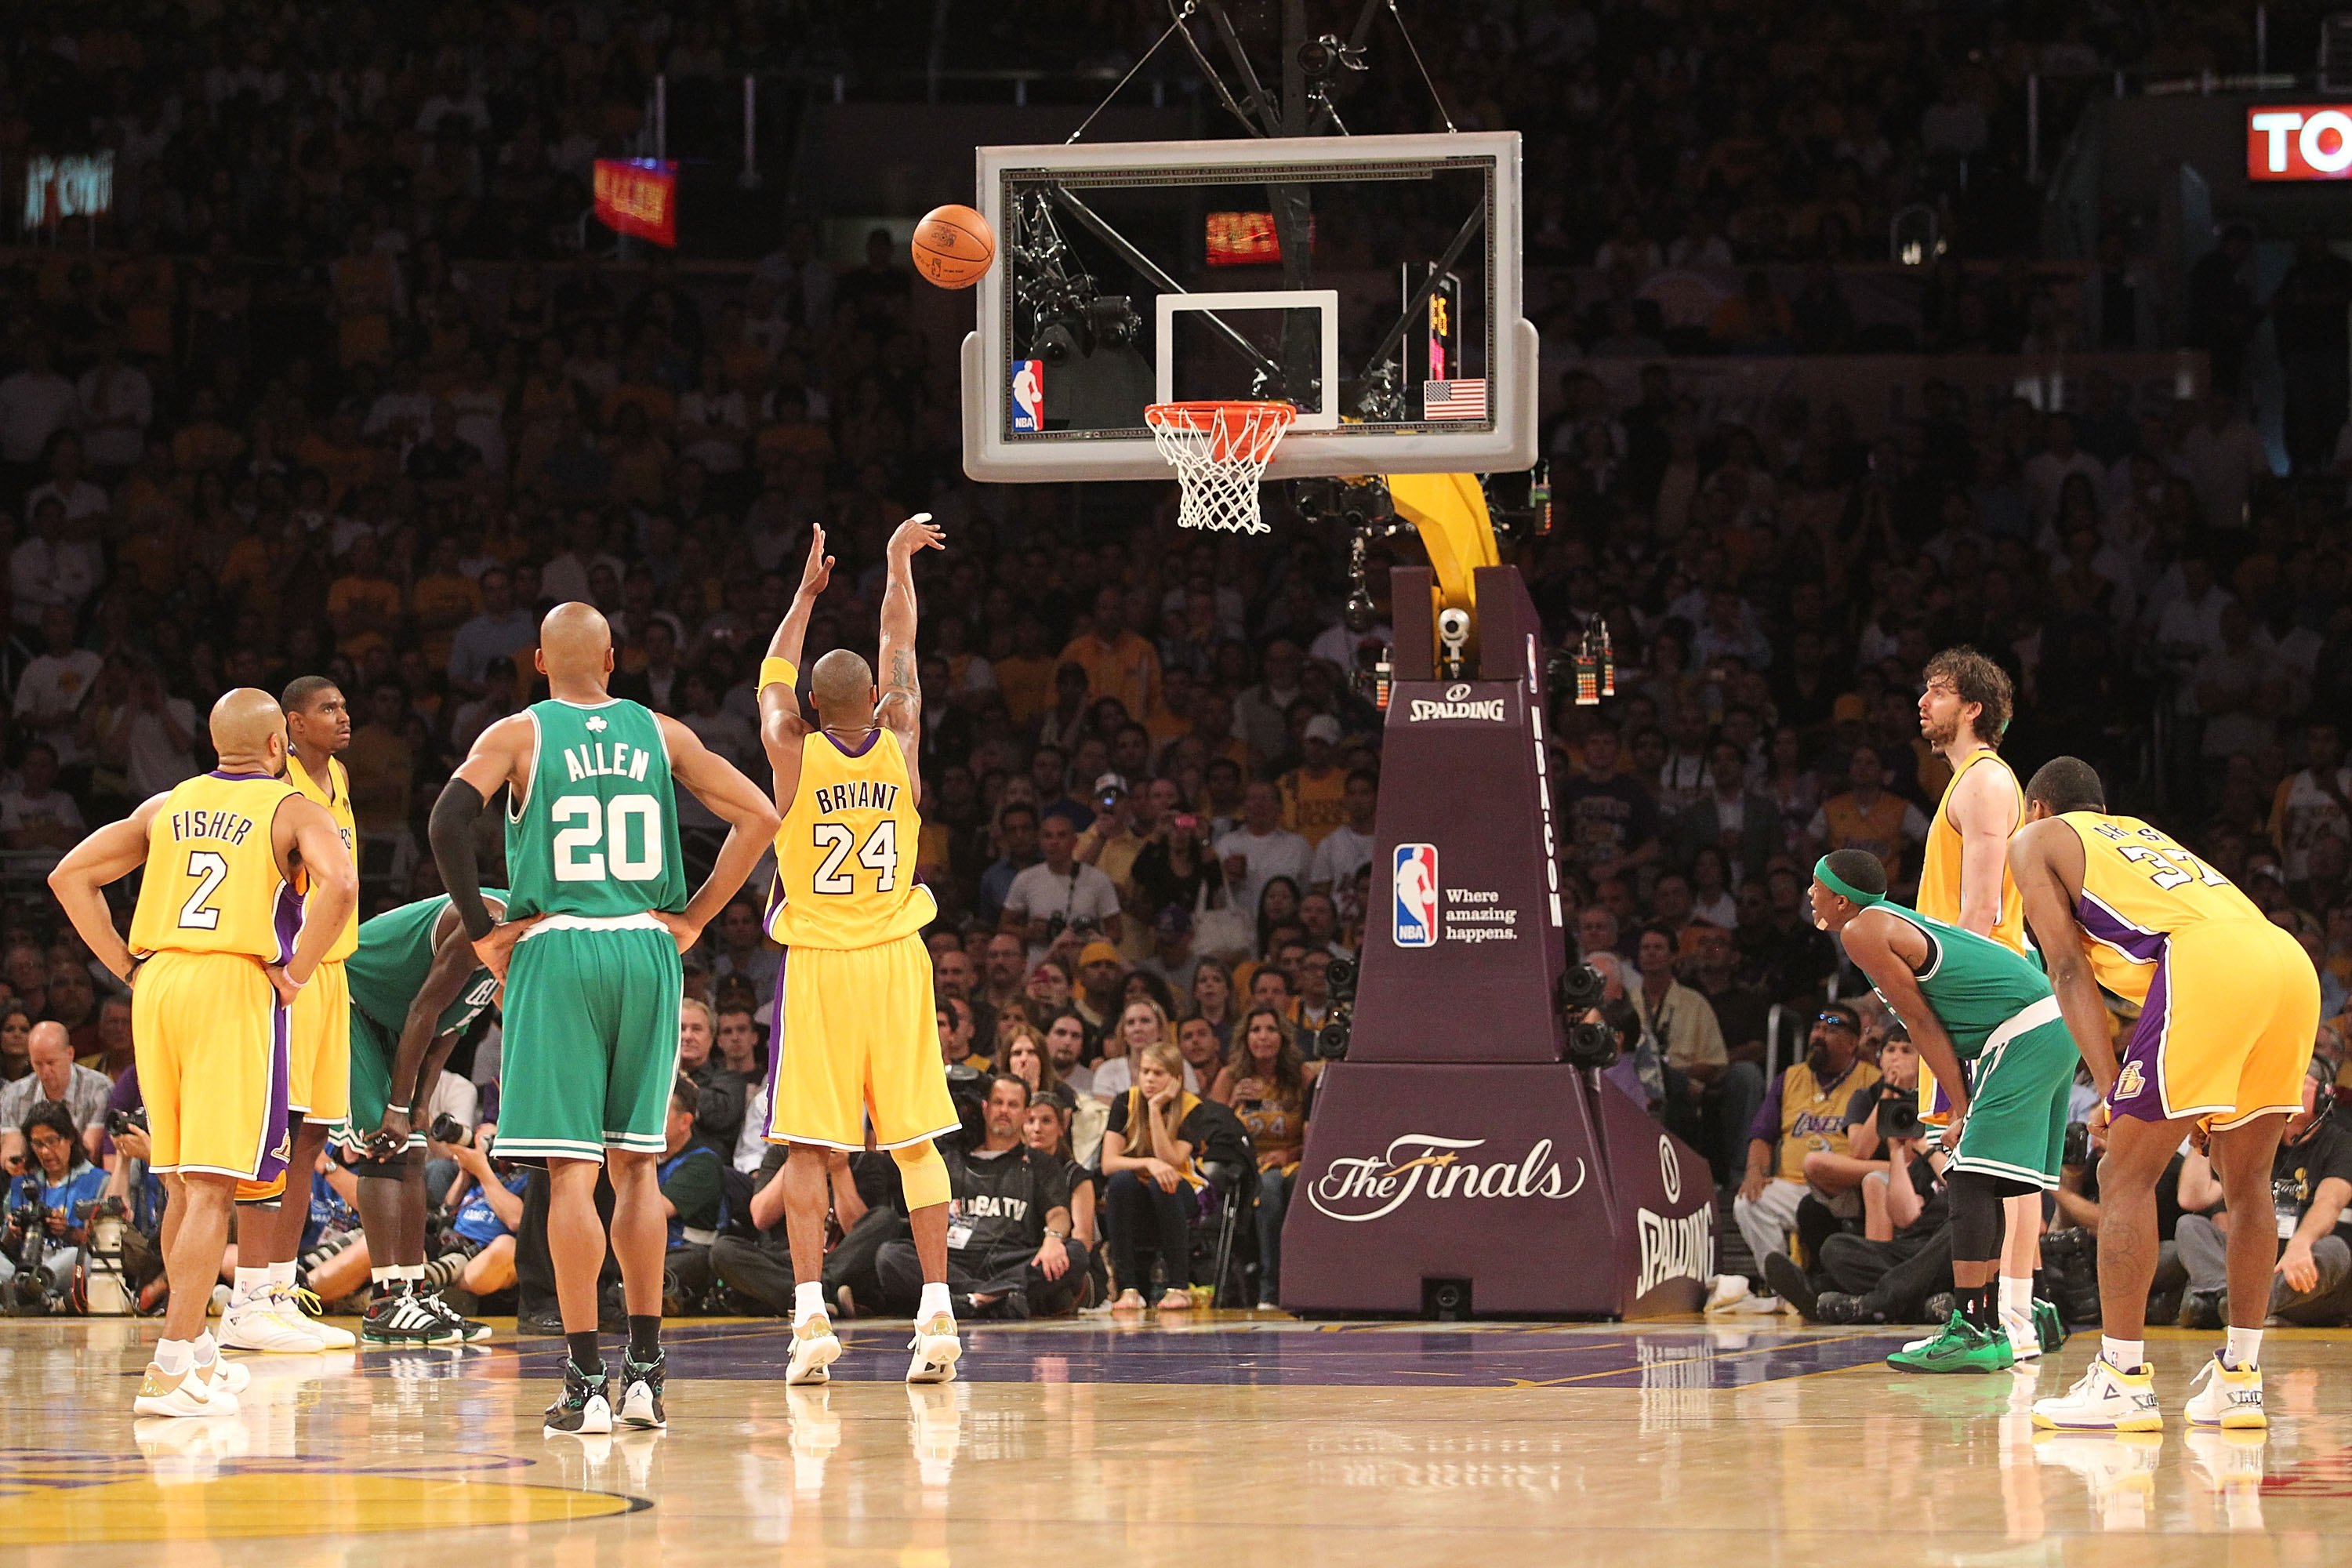 Kobe Bryant of the Los Angeles Lakers shoots a free throw in Game 7 of the 2010 NBA Finals.